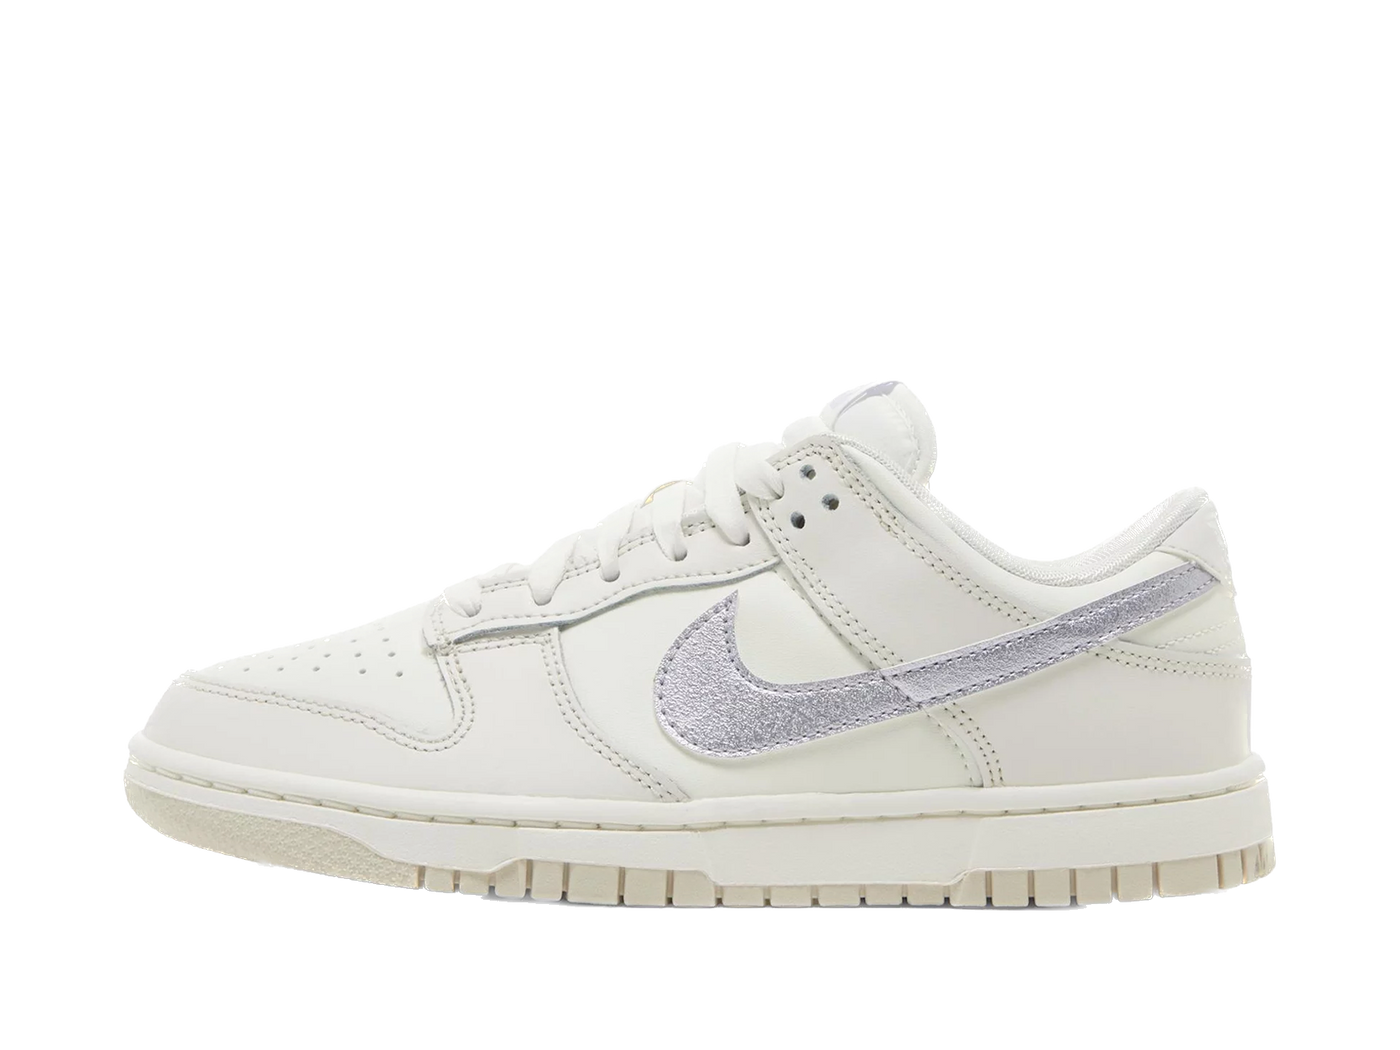 Not On The Shelf - Nike Dunk Low 'Sail Oxygen Purple' (W) - Women's Nike Dunk Low in sail oxygen purple.